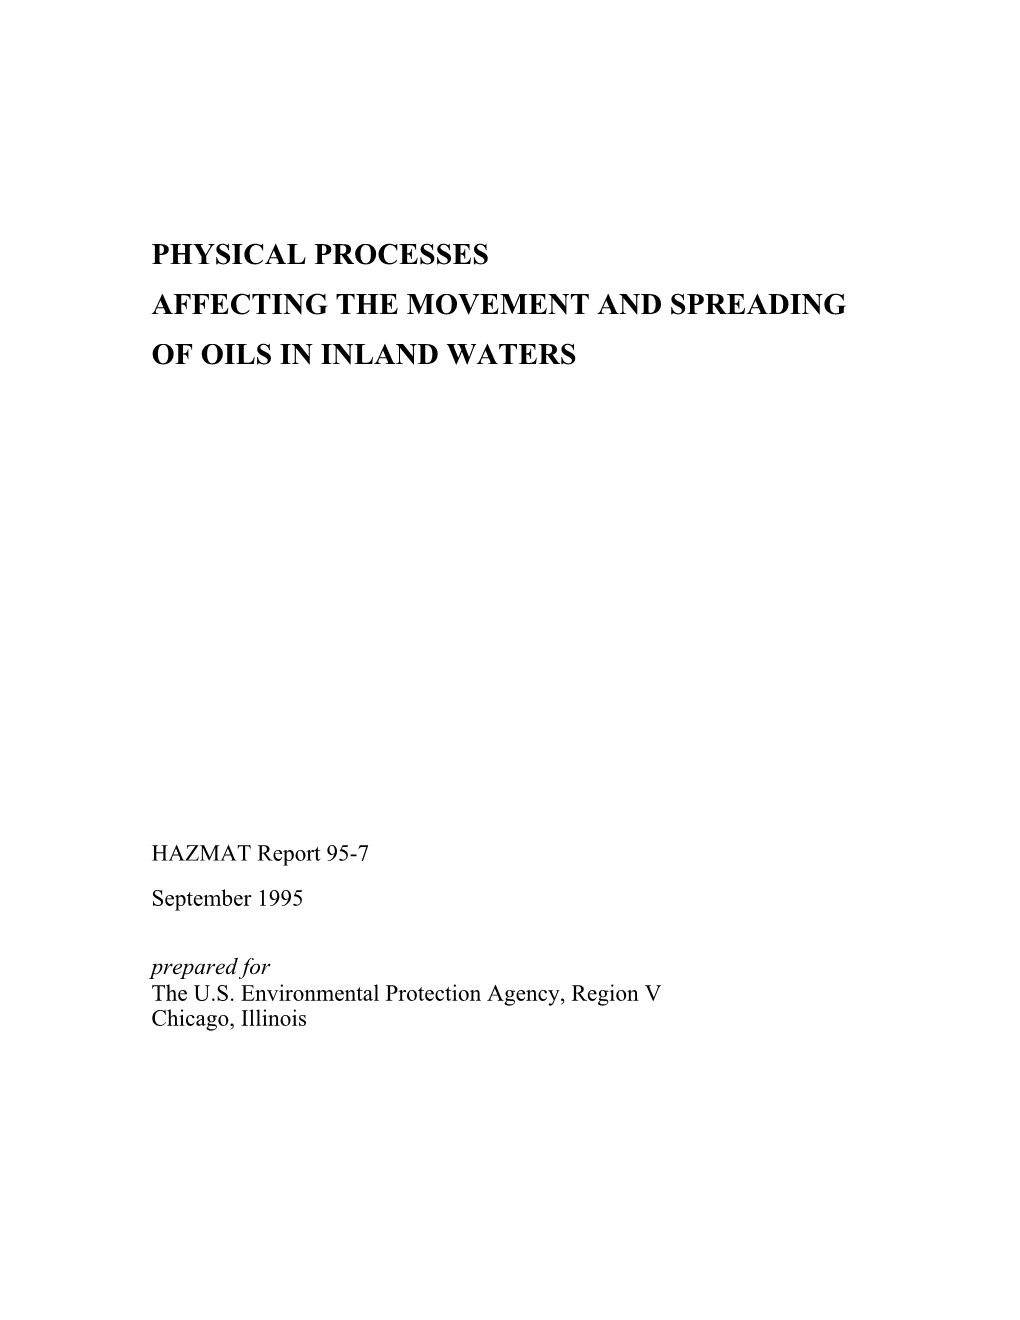 Physical Processes Affecting the Movement and Spreading of Oils in Inland Waters